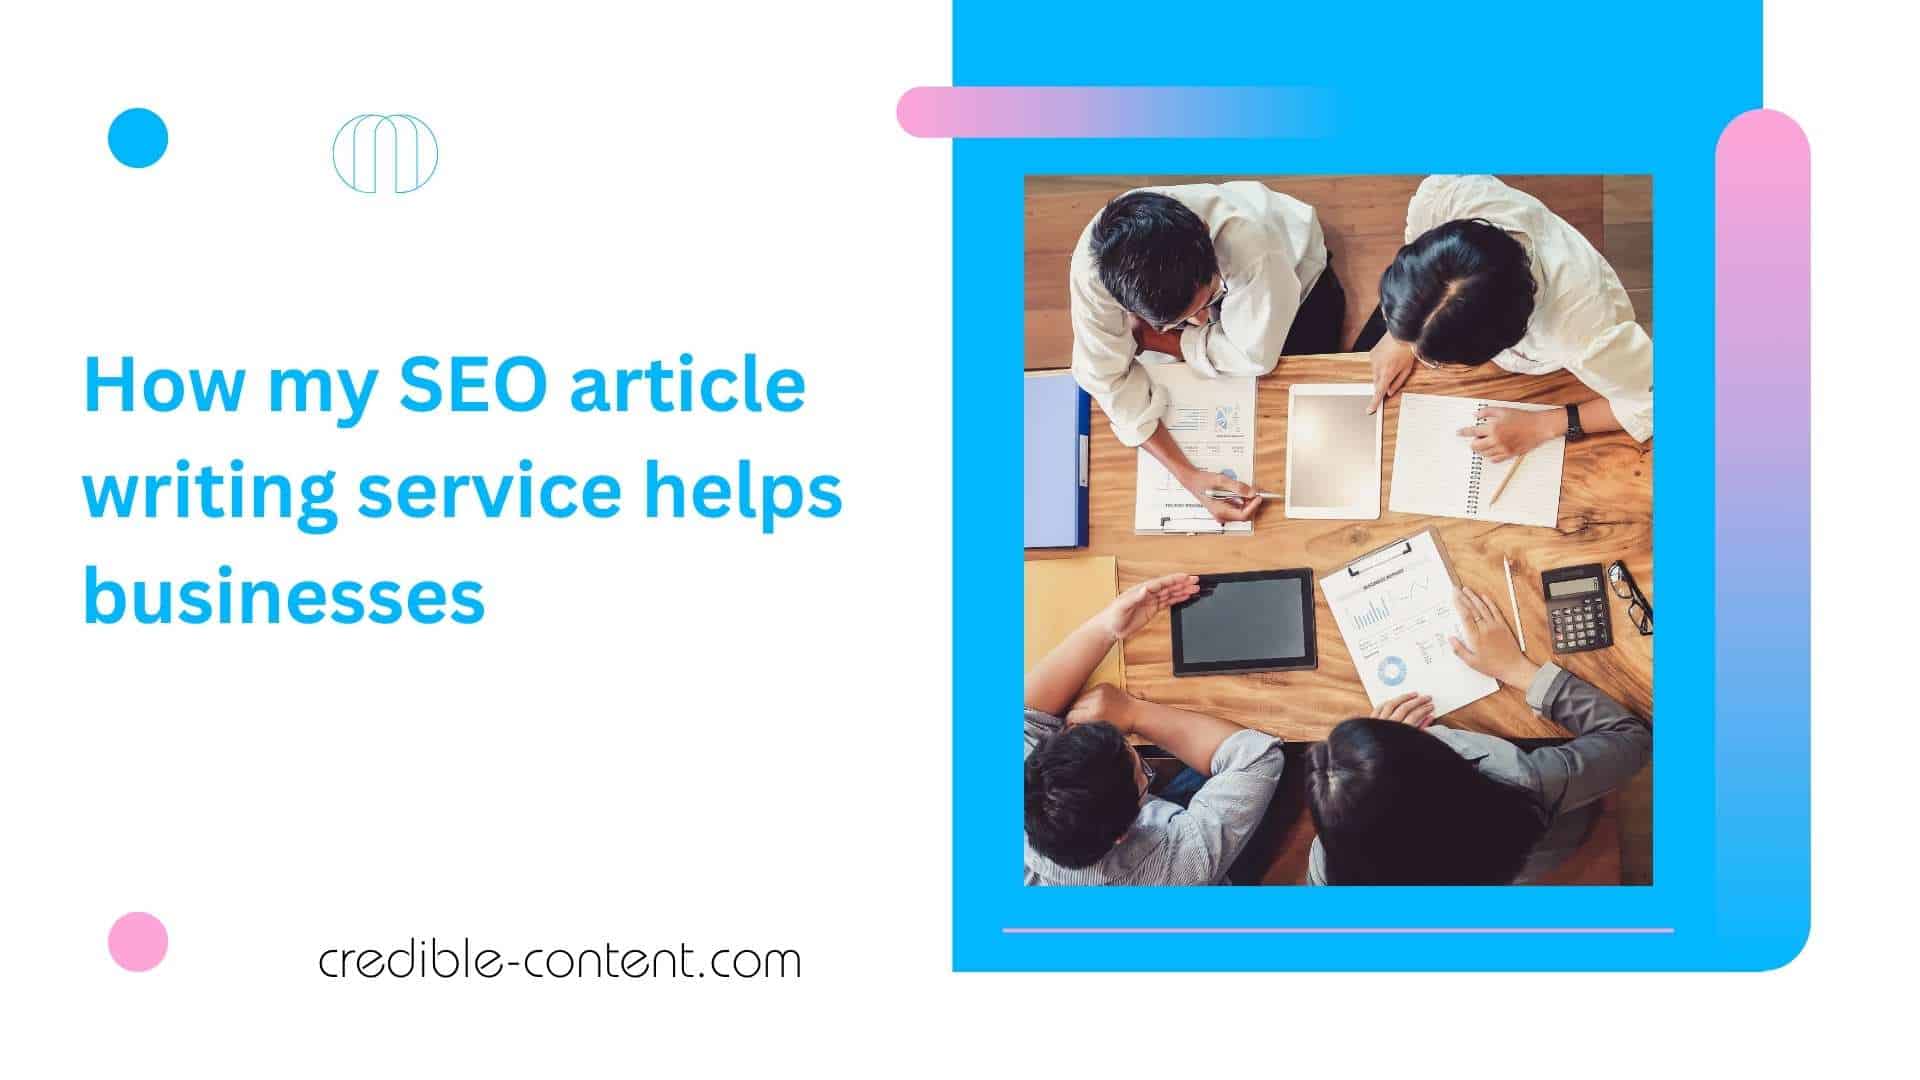 How my SEO article writing service helps businesses